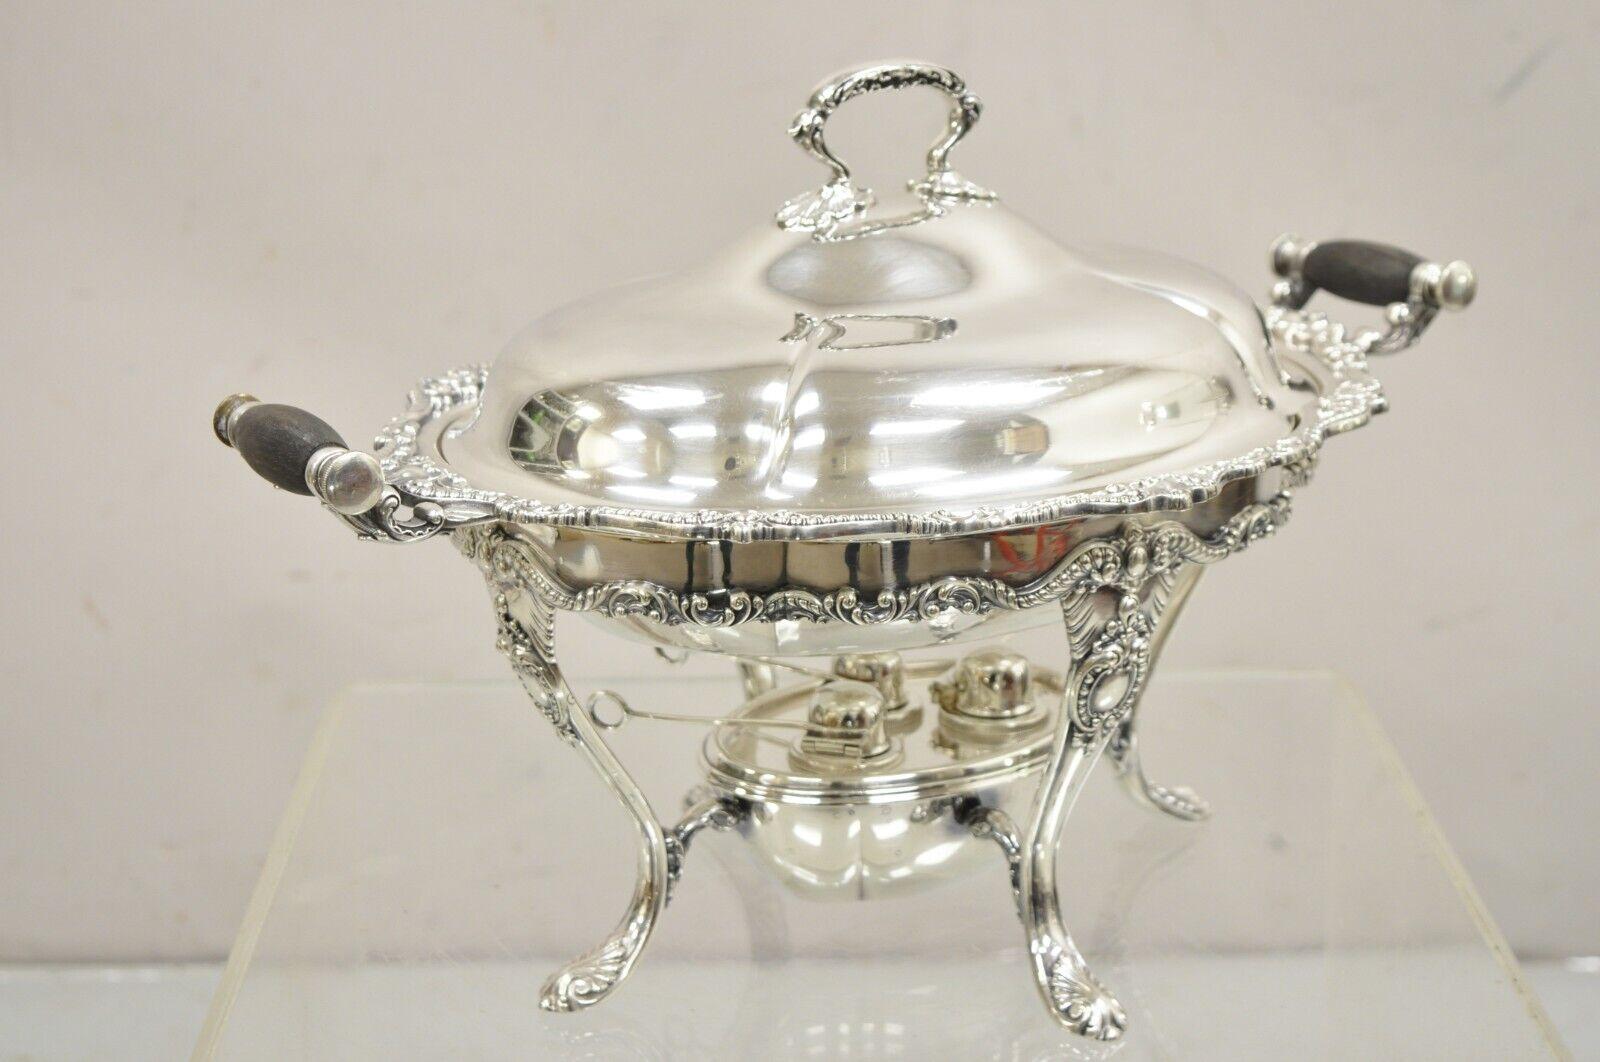 Vintage Reed & Barton Victorian Style Silver Plated Warming Serving Chafing Dish with Triple Burners. Circa Mid to Late 20th Century. Measurements: 11